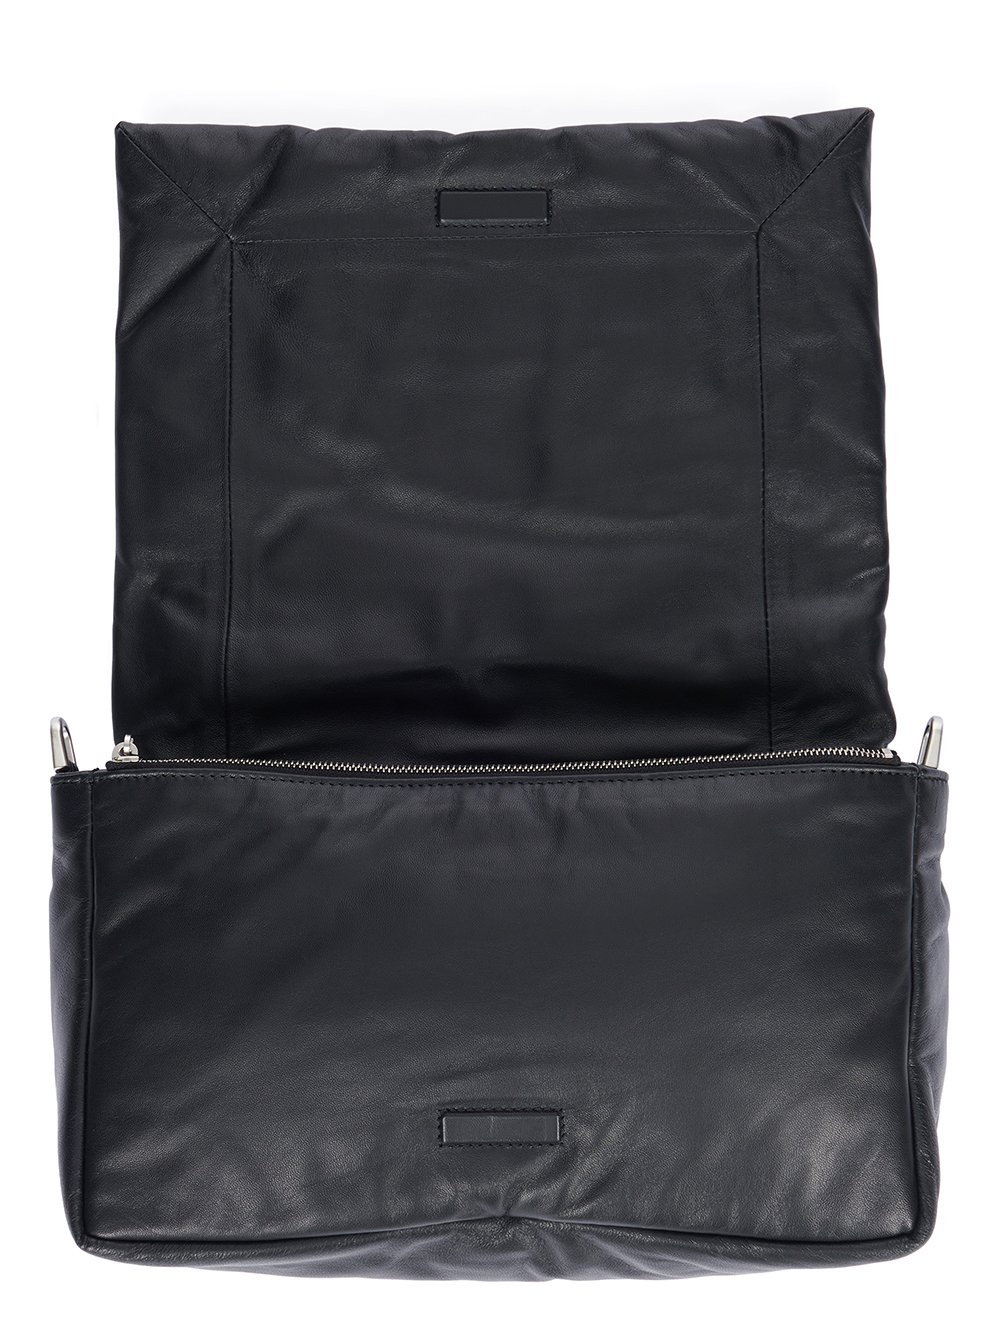 RICK OWENS FW23 LUXOR BIG PILLOW GRIFFIN IN BLACK PEACHED LAMBSKIN